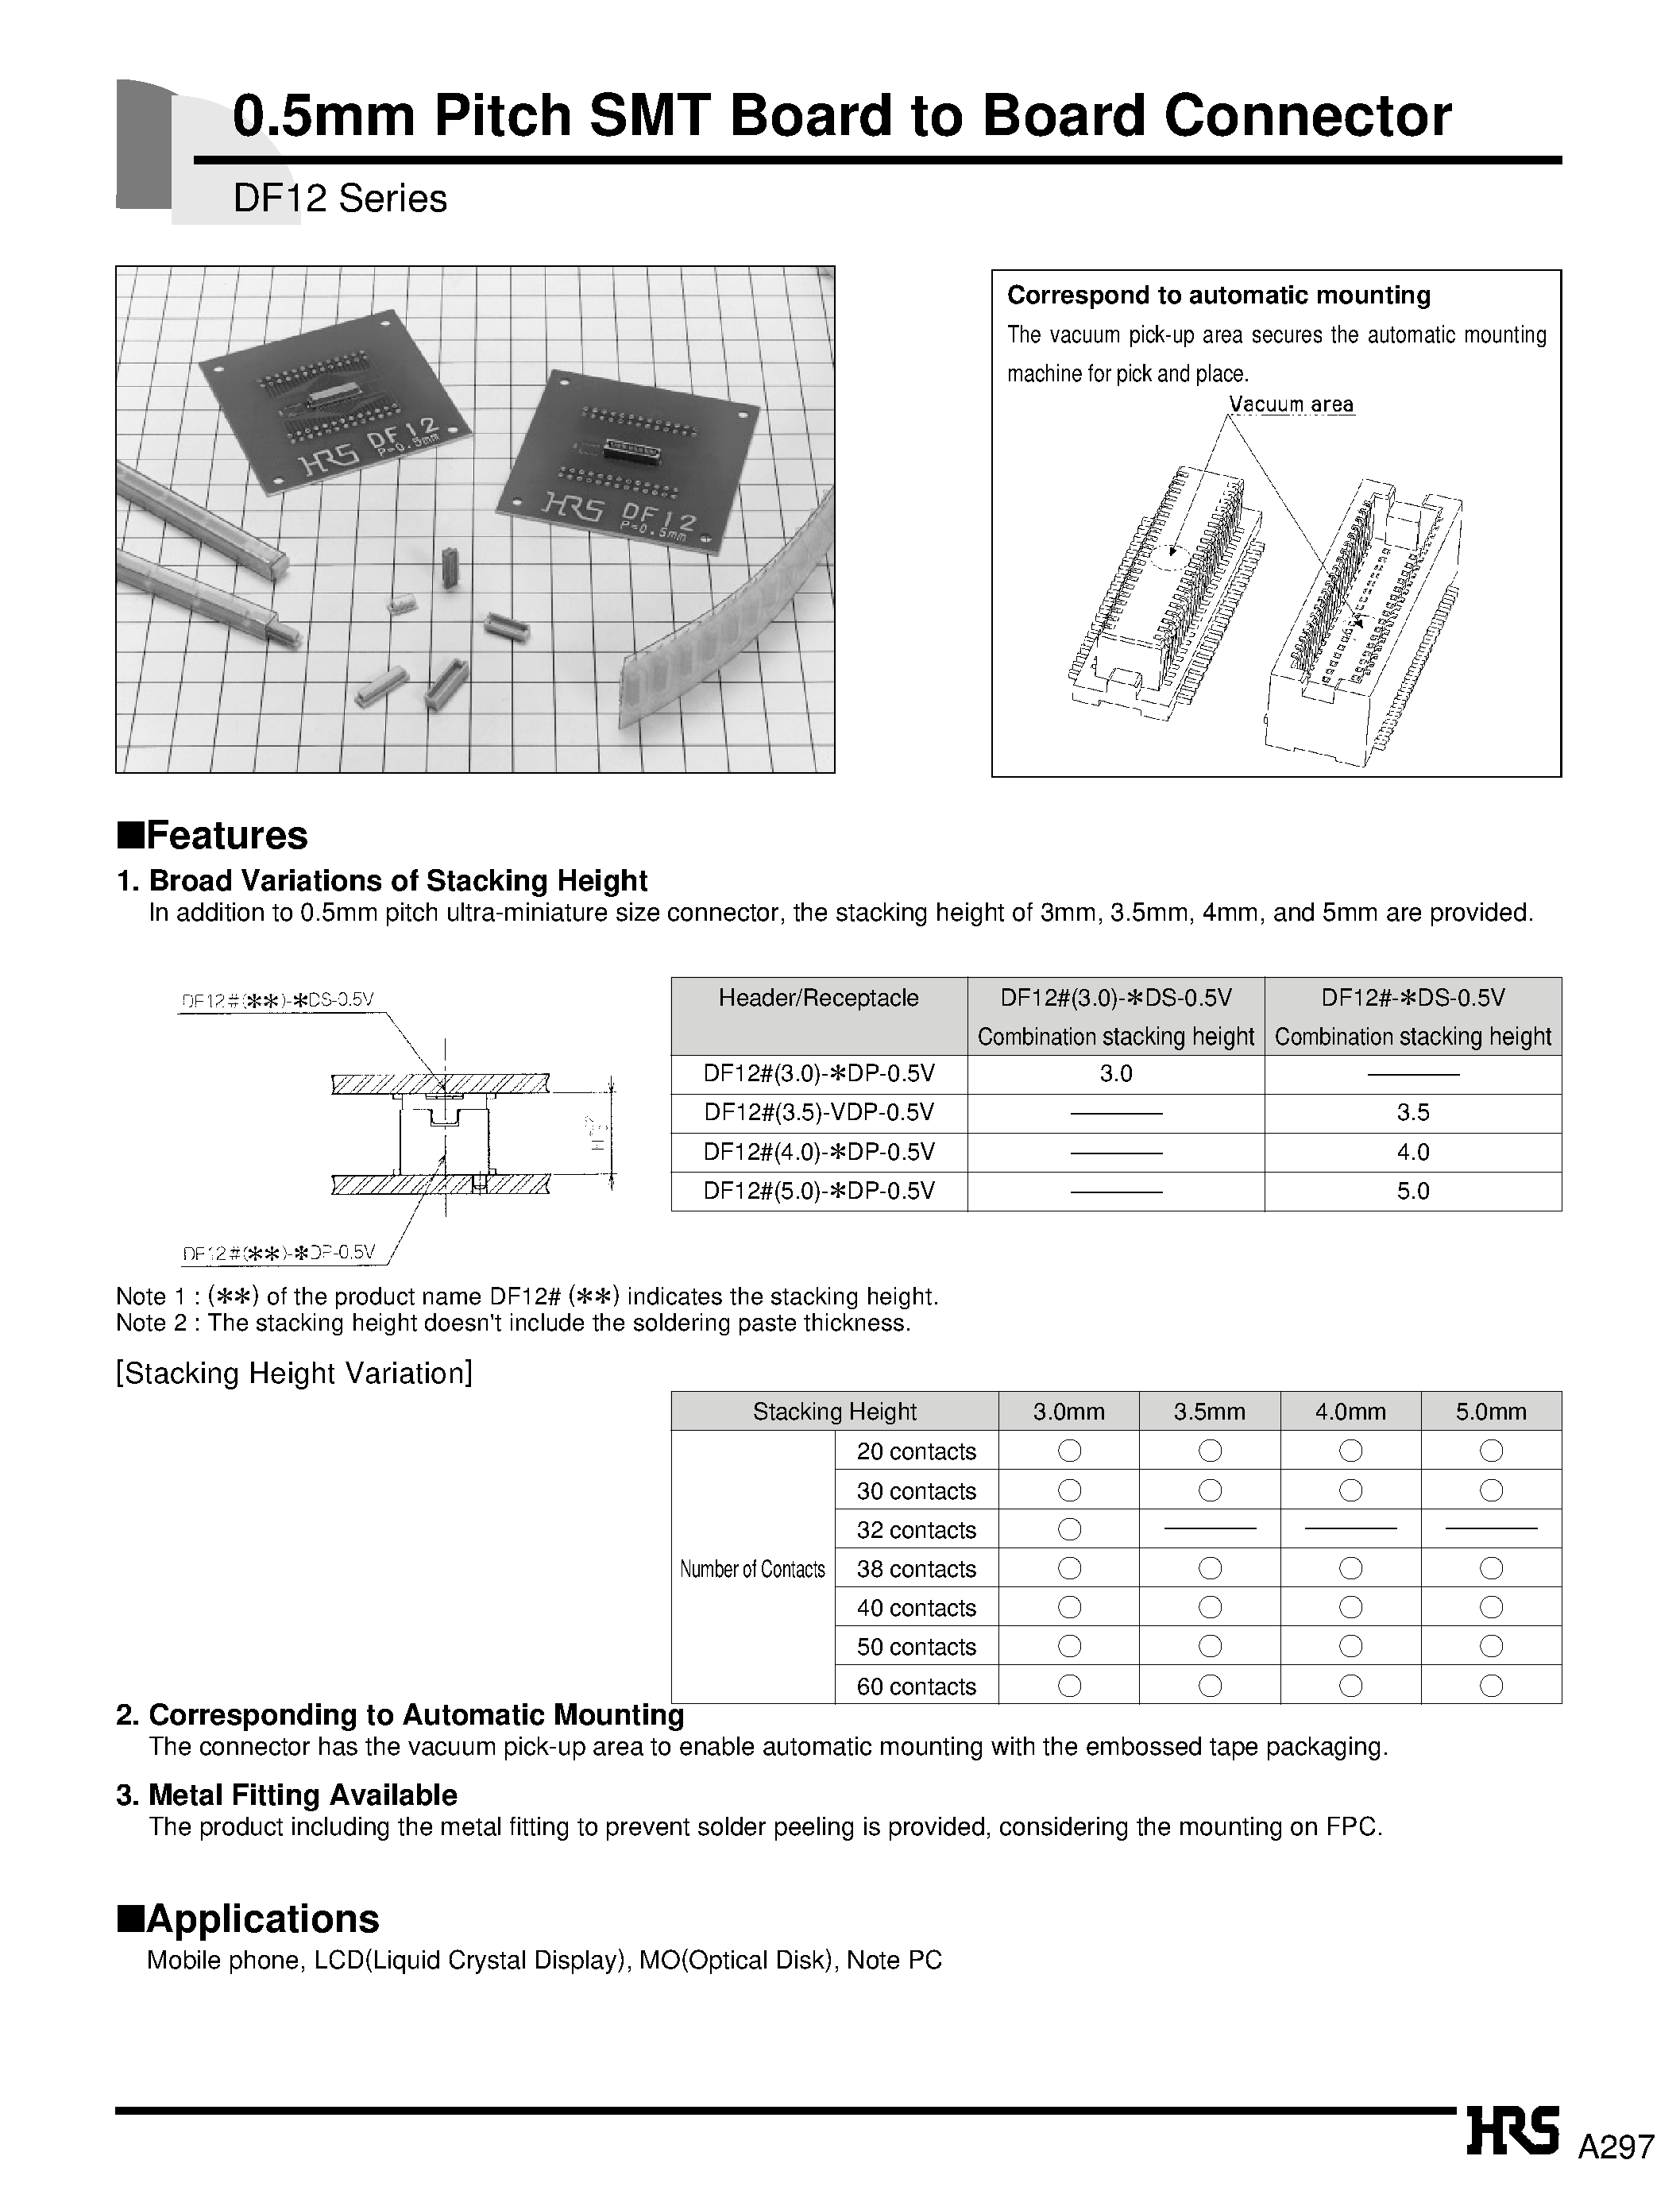 Datasheet DF12A-36DP-0.5V - 0.5mm Pitch SMT Board to Board Connector page 1